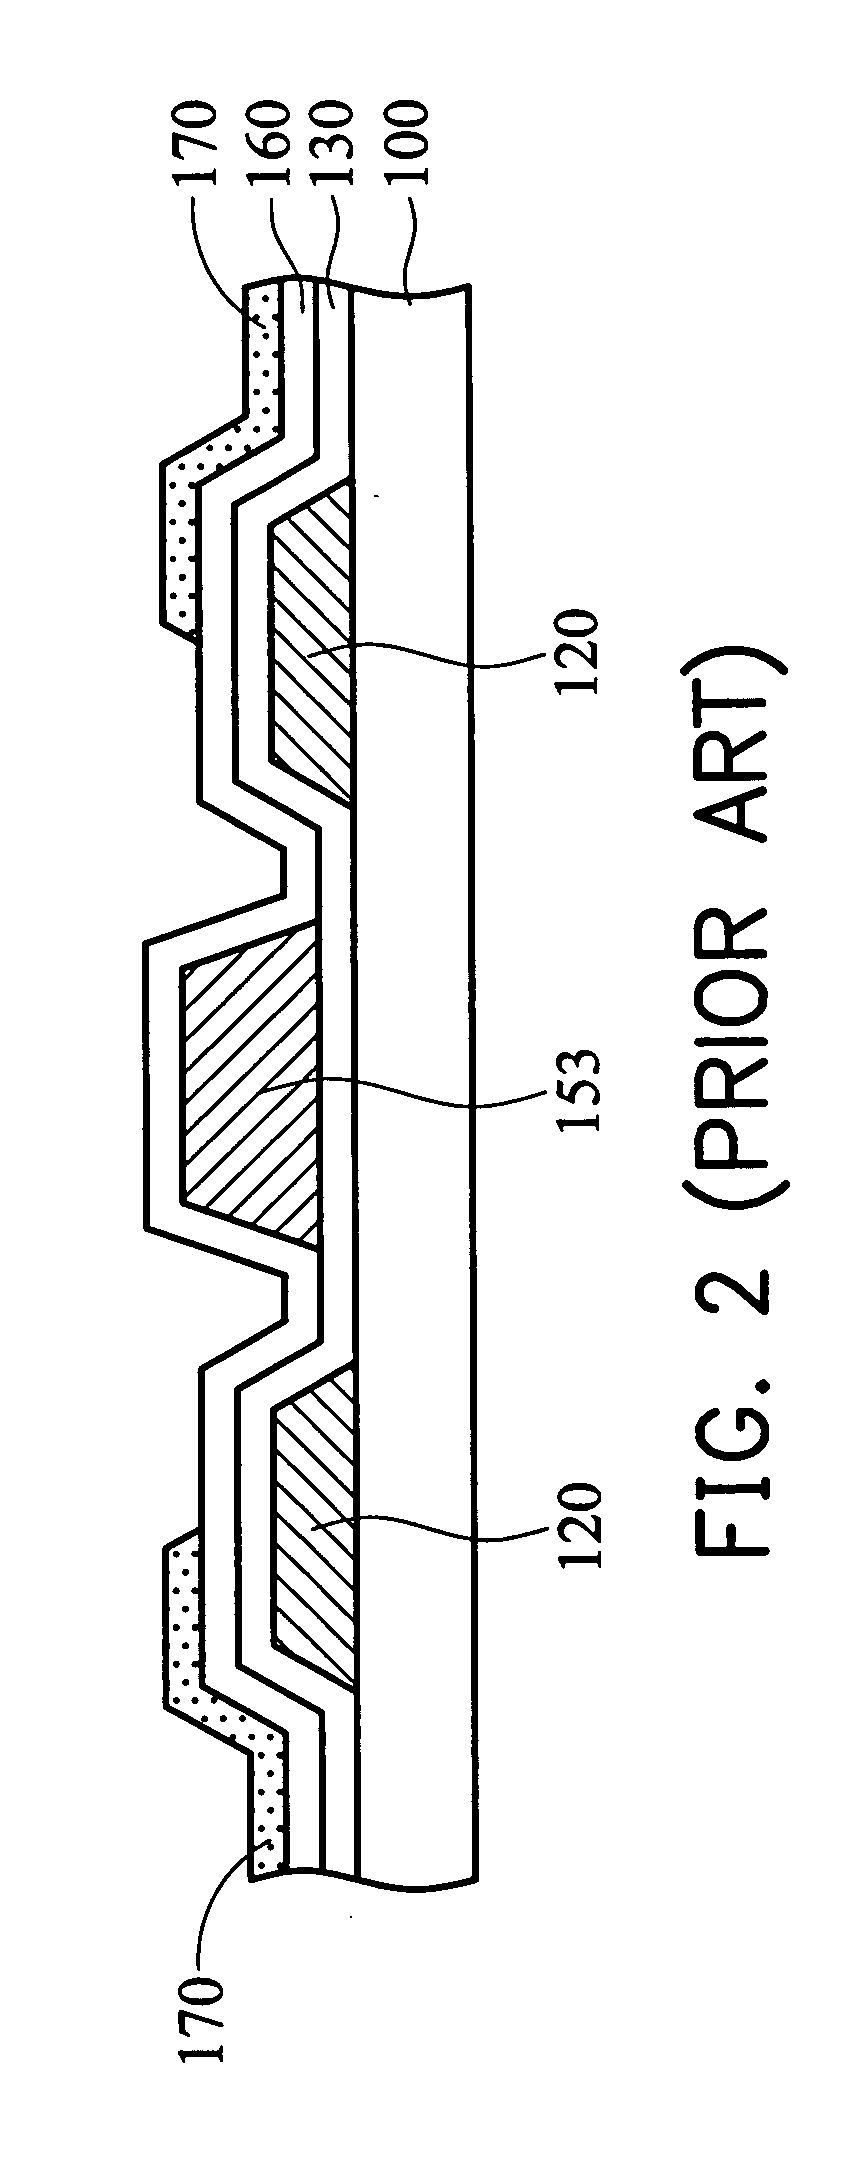 Method of stabilizing parasitic capacitance in an LCD device